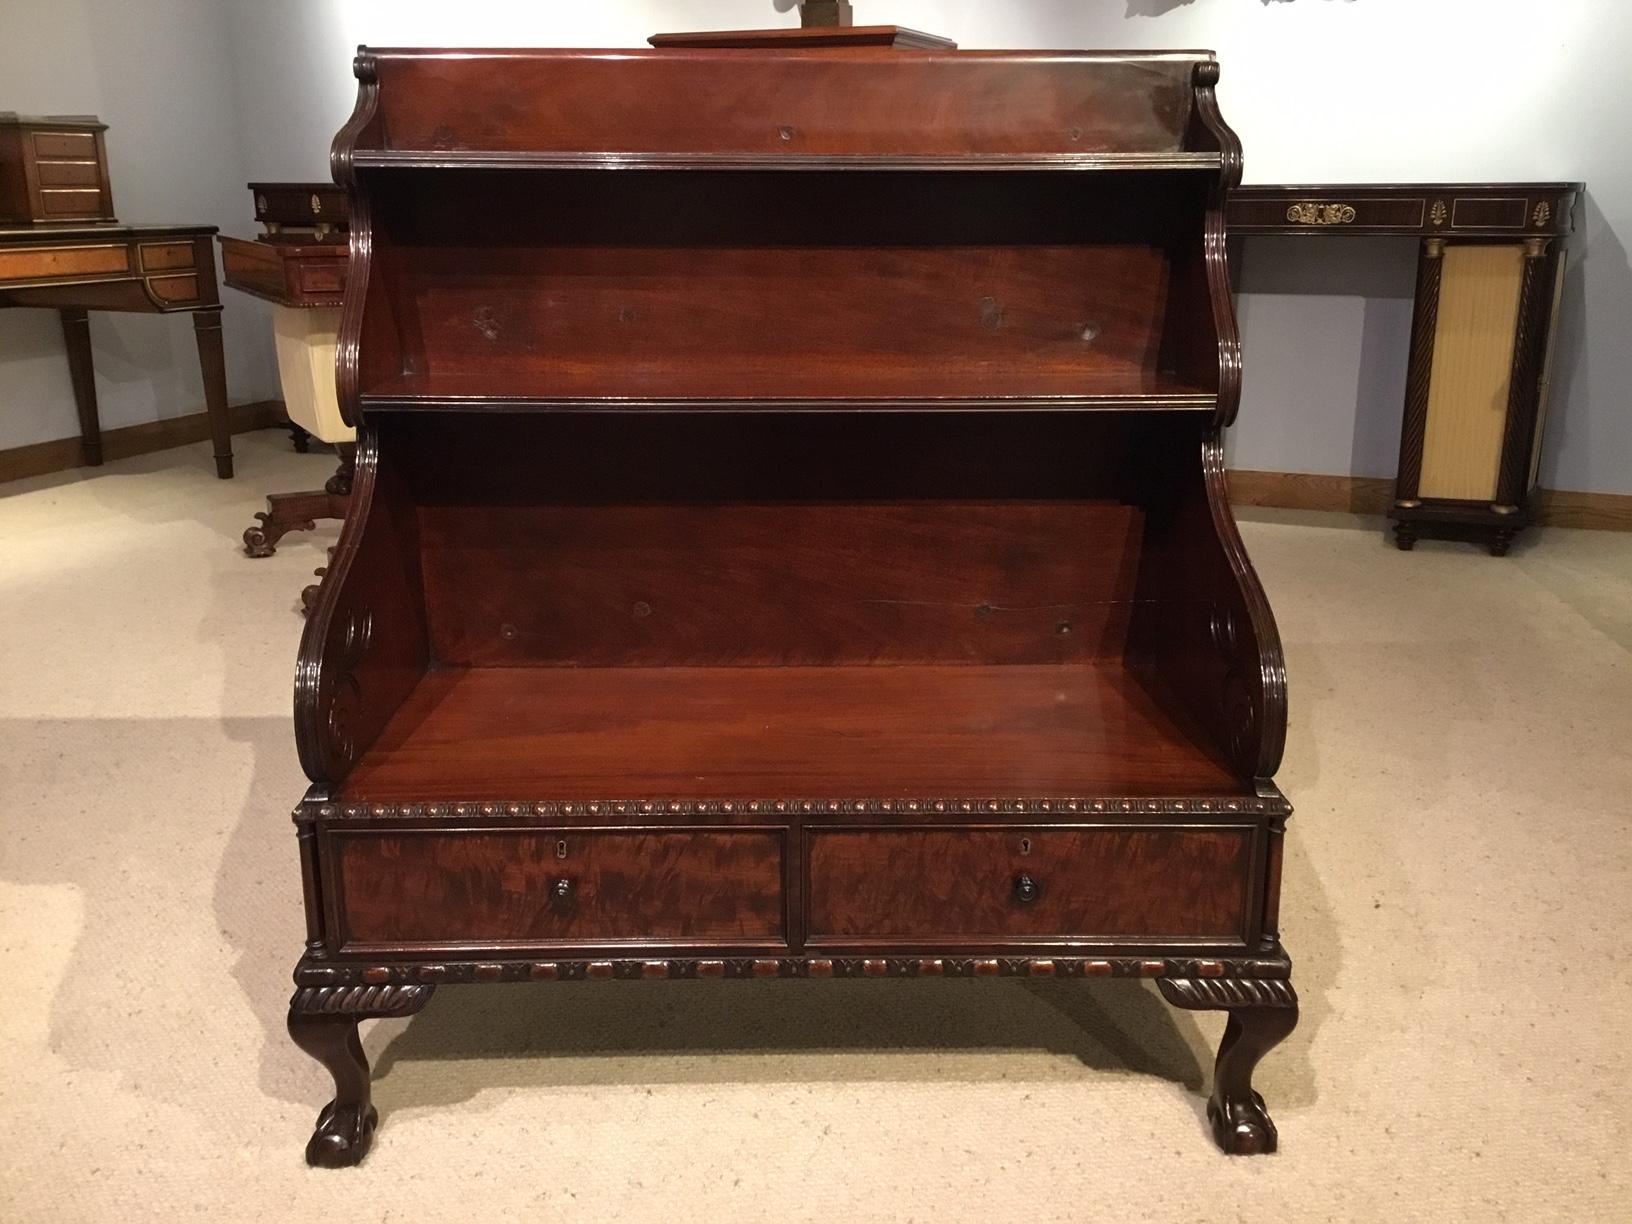 A mahogany Regency period waterfall bookcase. The Cuban mahogany back panel having two raised shelves with reeded edges, finely carved shaped ends and two mahogany line drawers to the base. The drawers veneered in the finest figured mahogany with